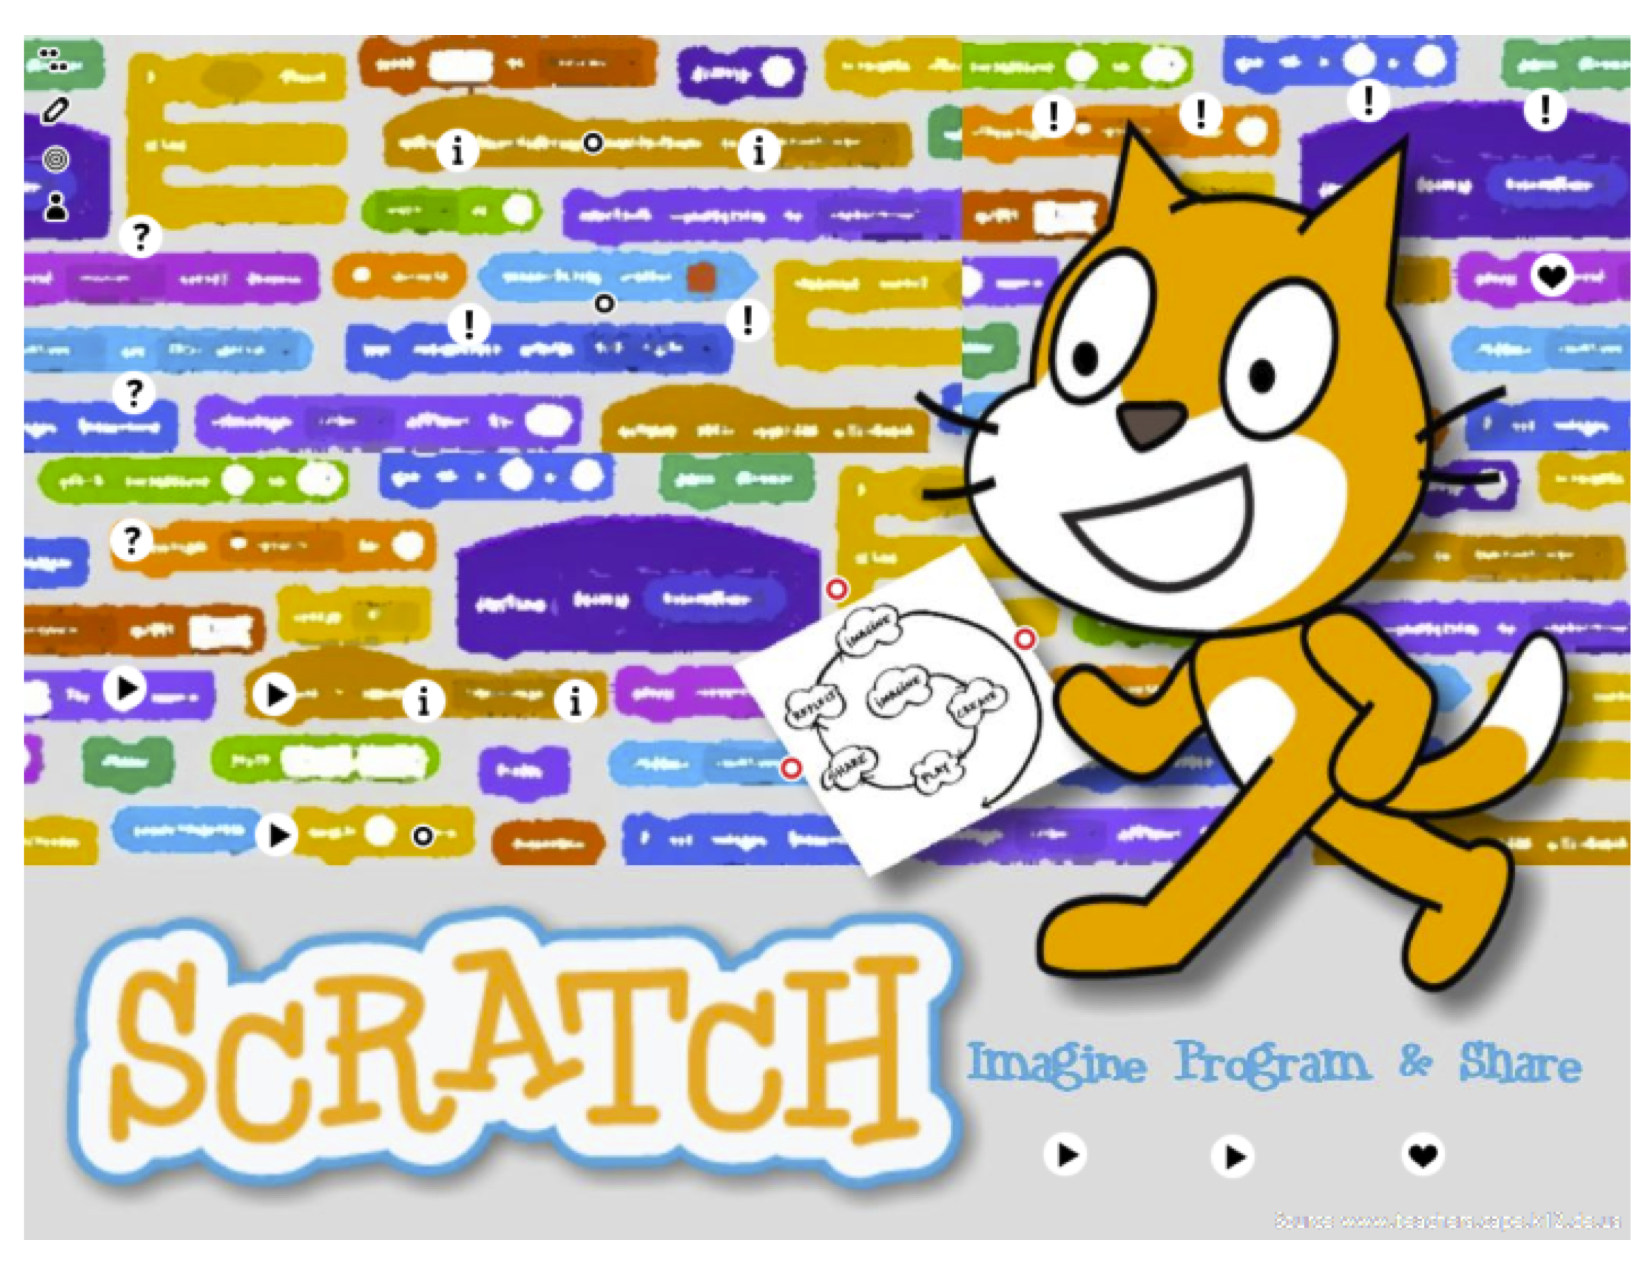 how to make presentation in scratch